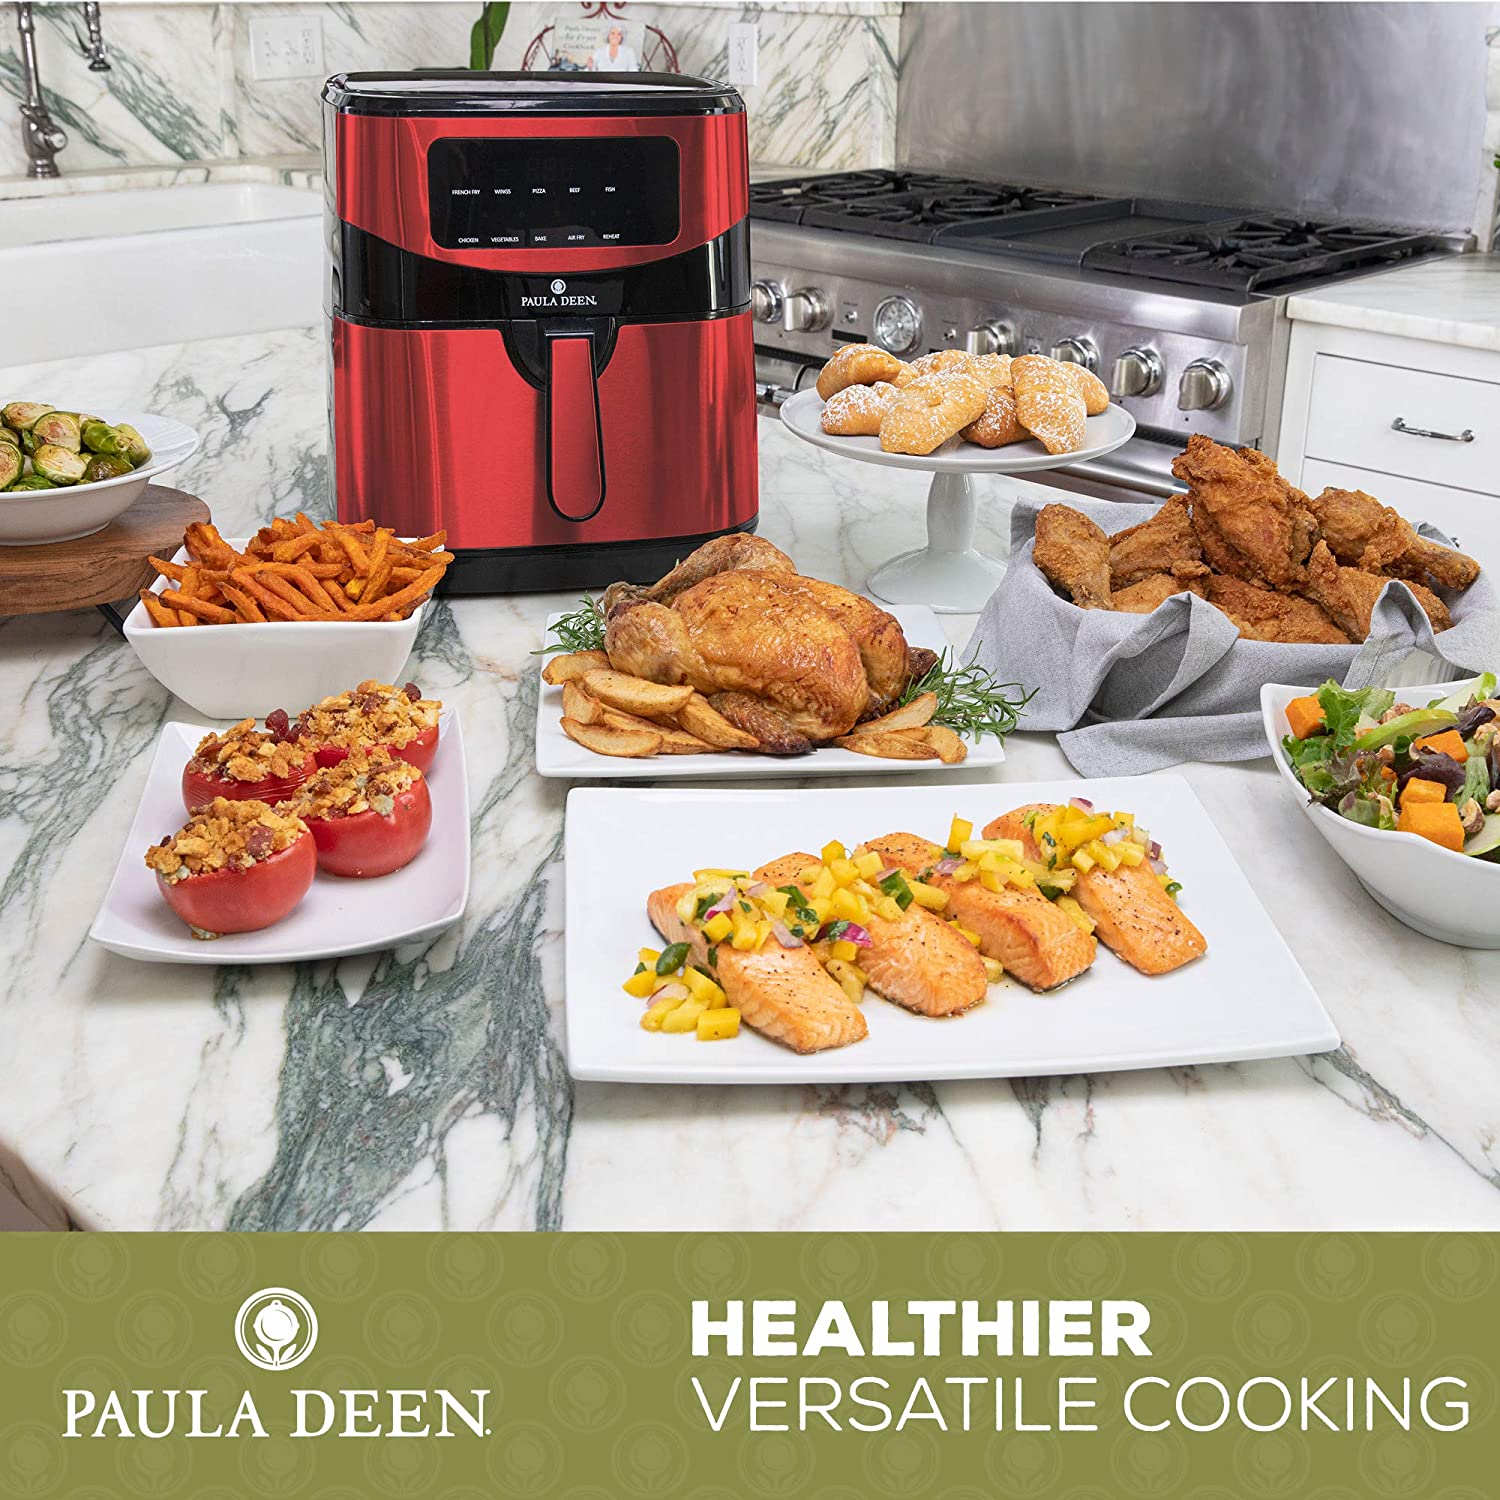 Paula Deen PDKDF579RR-RB Stainless Steel 10Qt Air Fryer, Red Stainless - Certified Refurbished